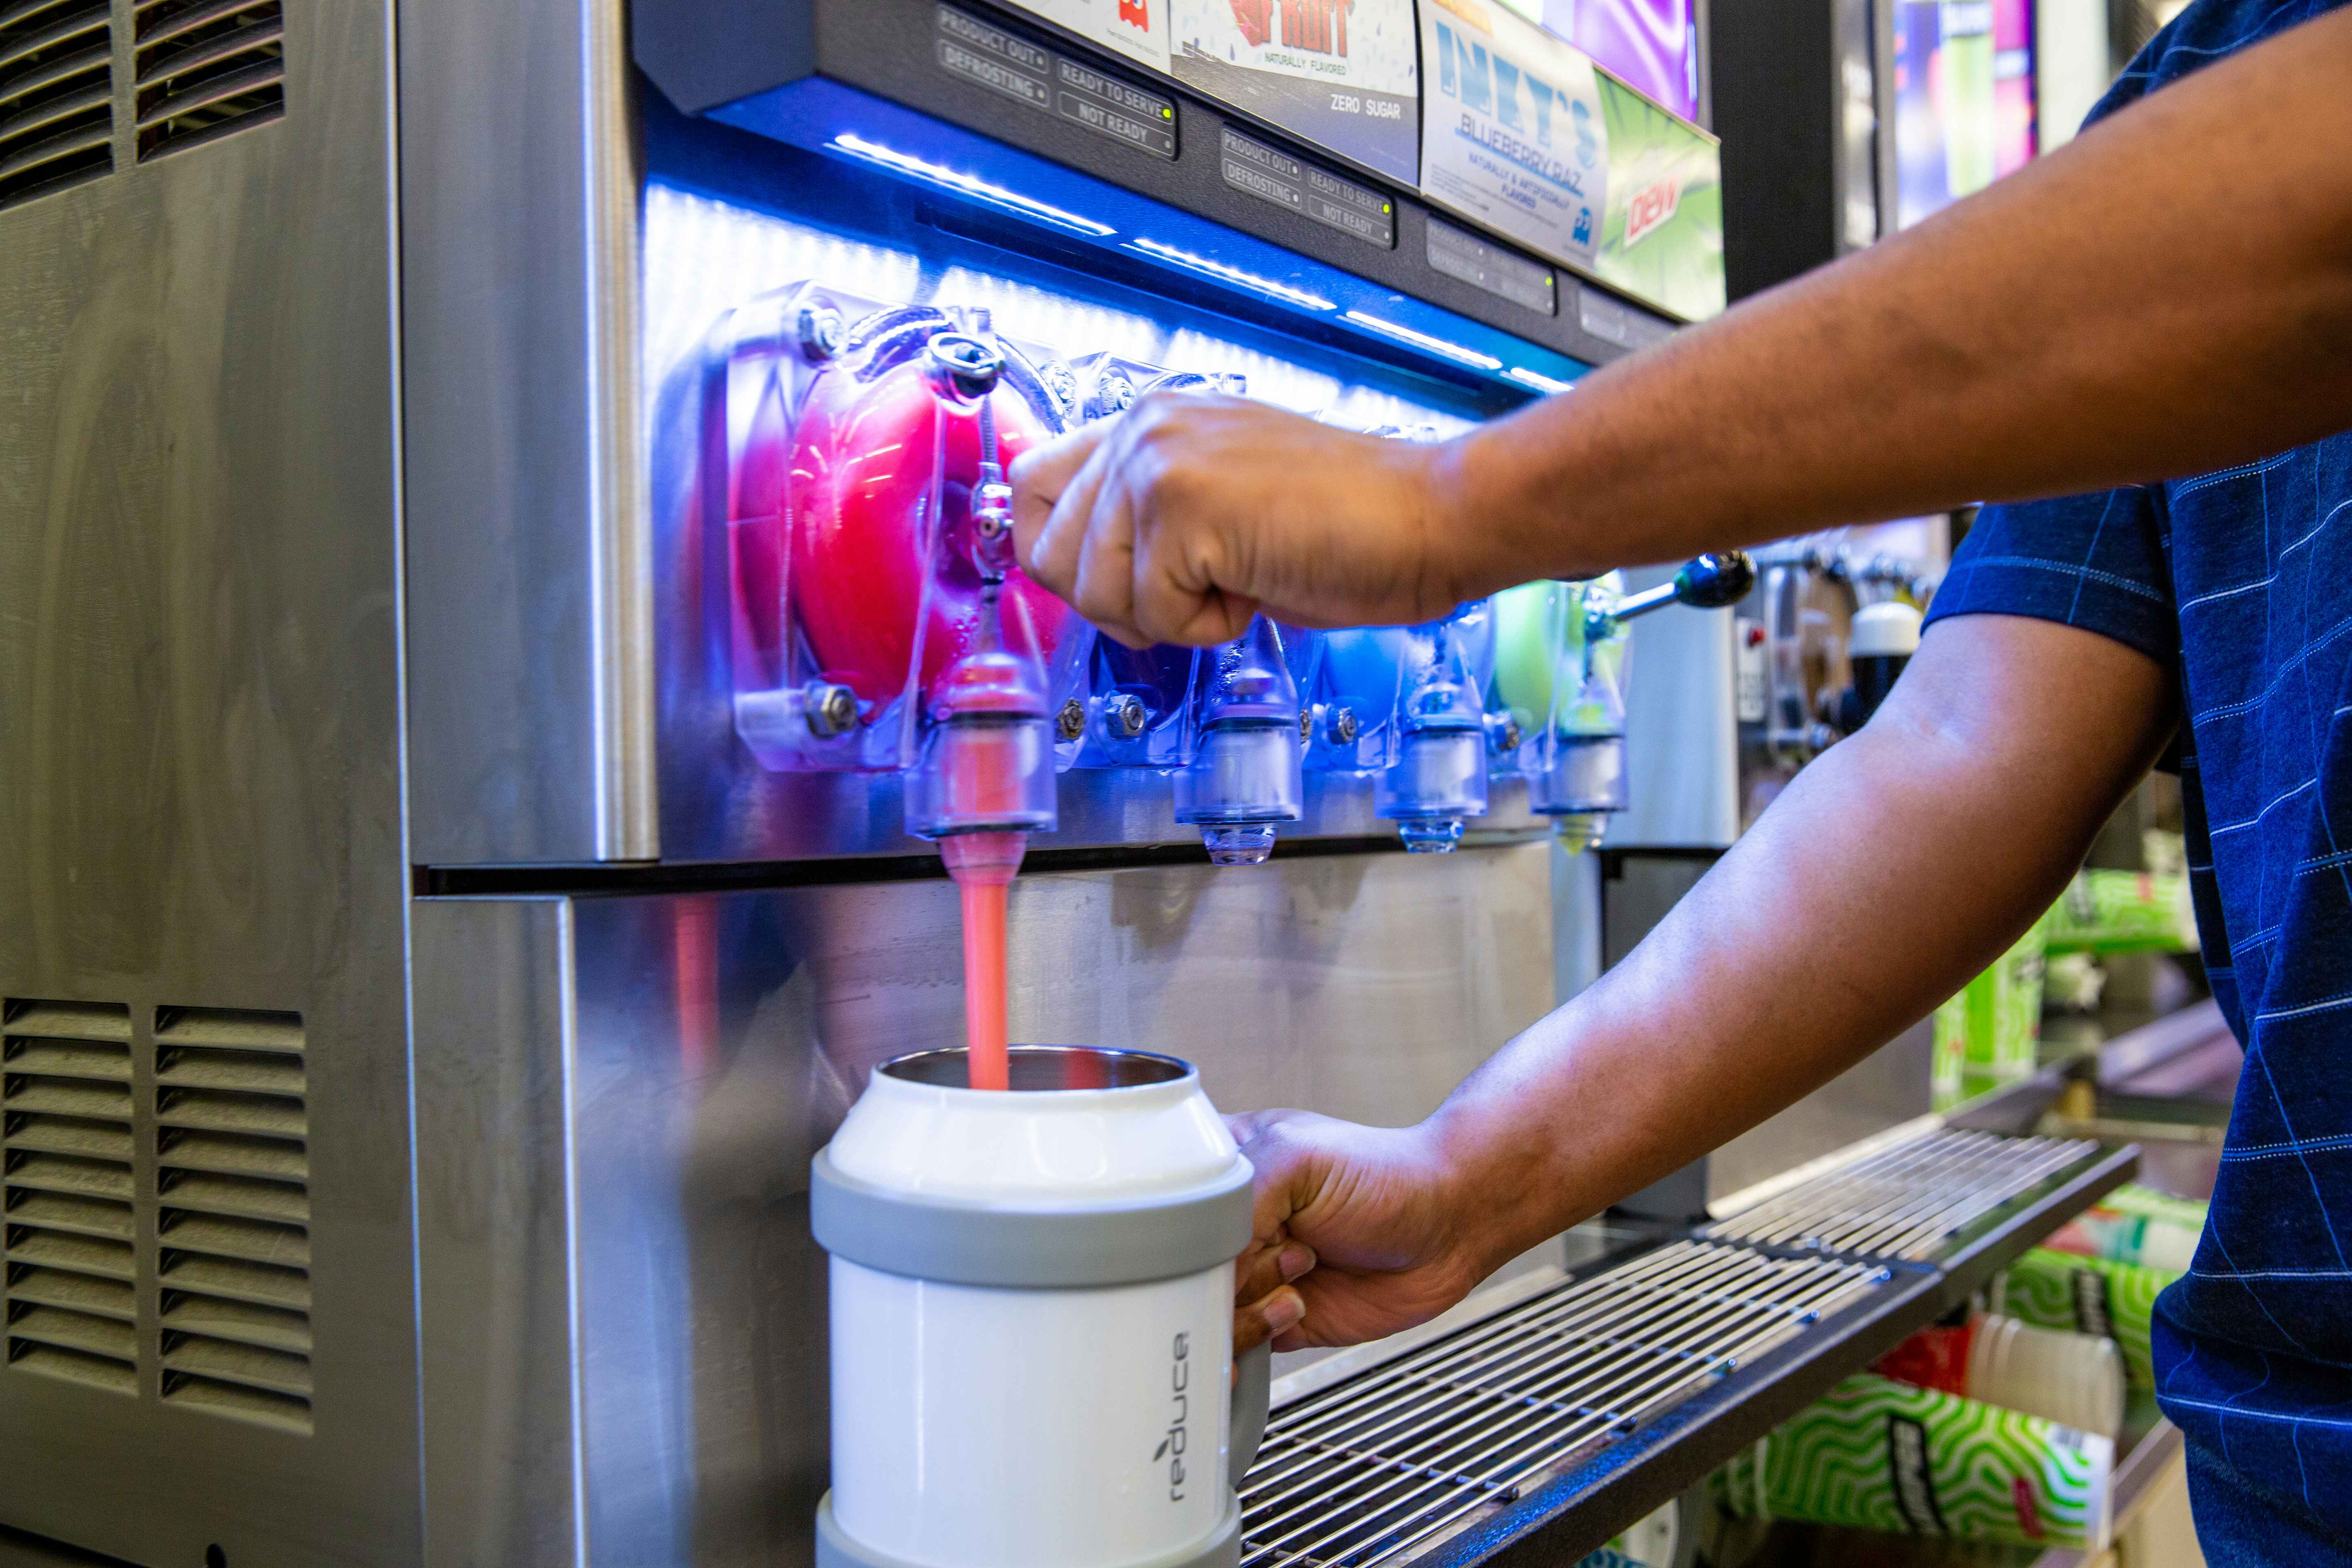 Someone using the slurpee machine in a very large insulated cup